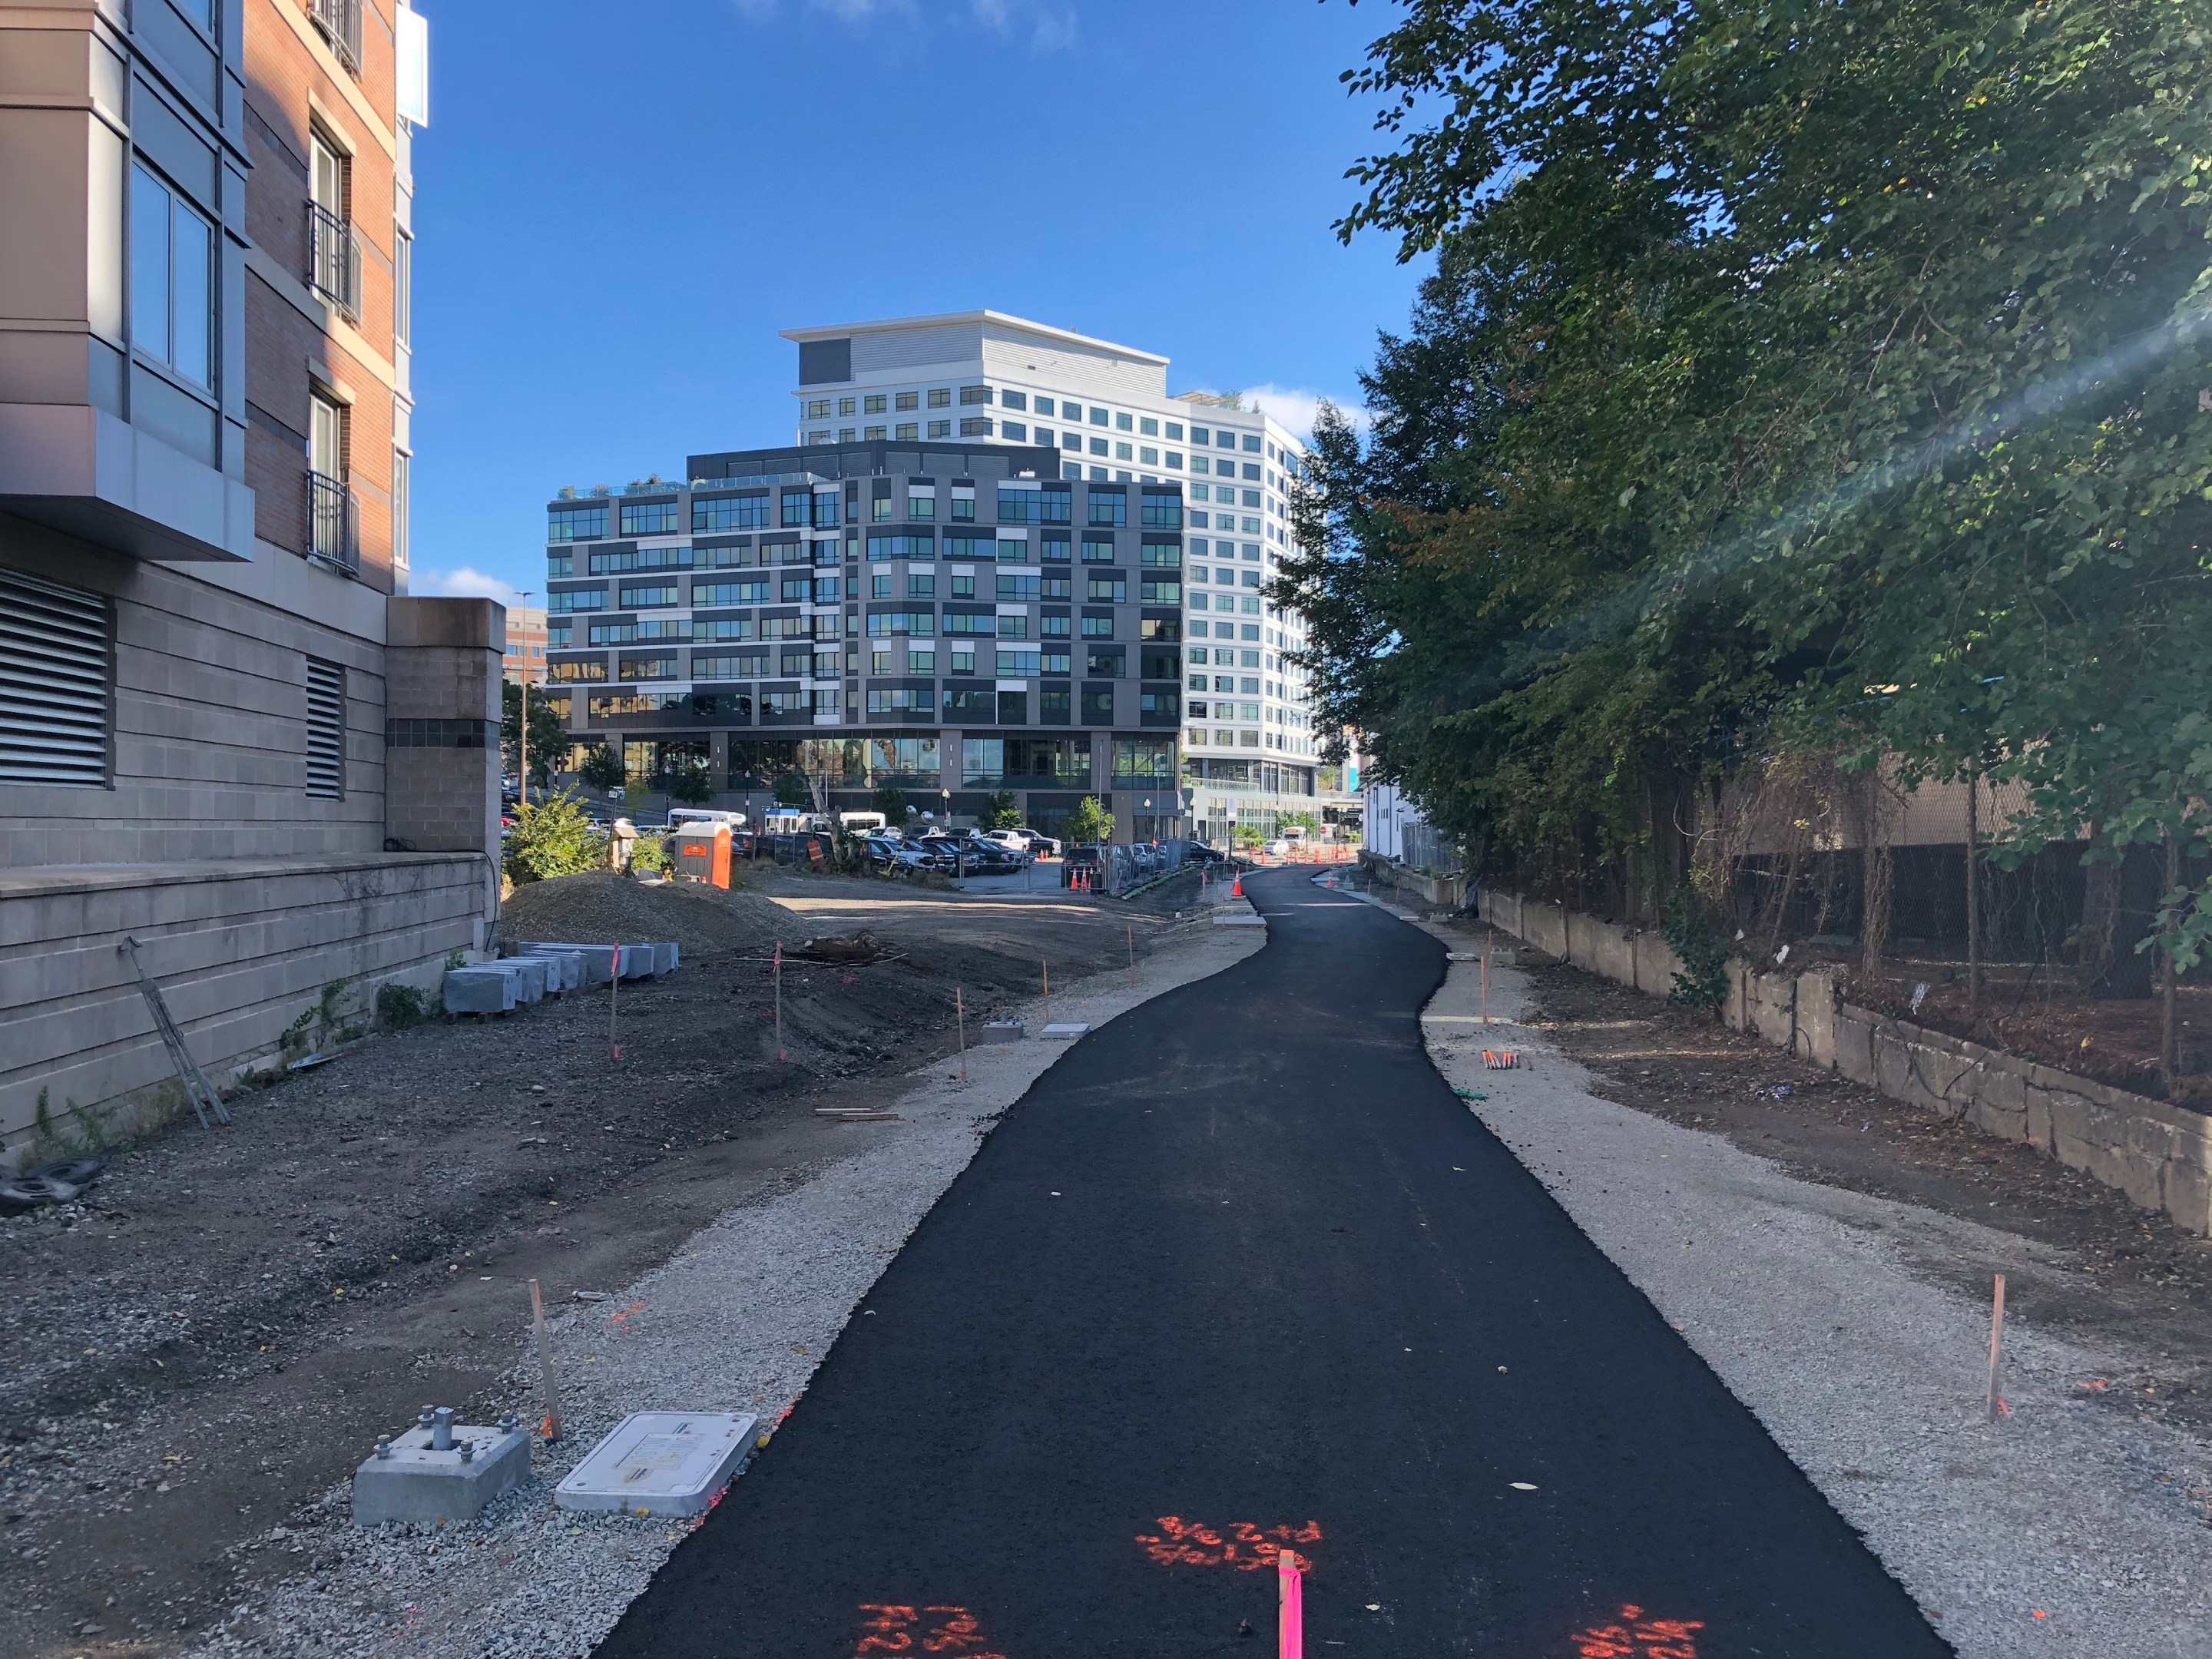 Fresh pavement on an under-construction bike path. In the distance are two new tall buildings near Kenmore Square.